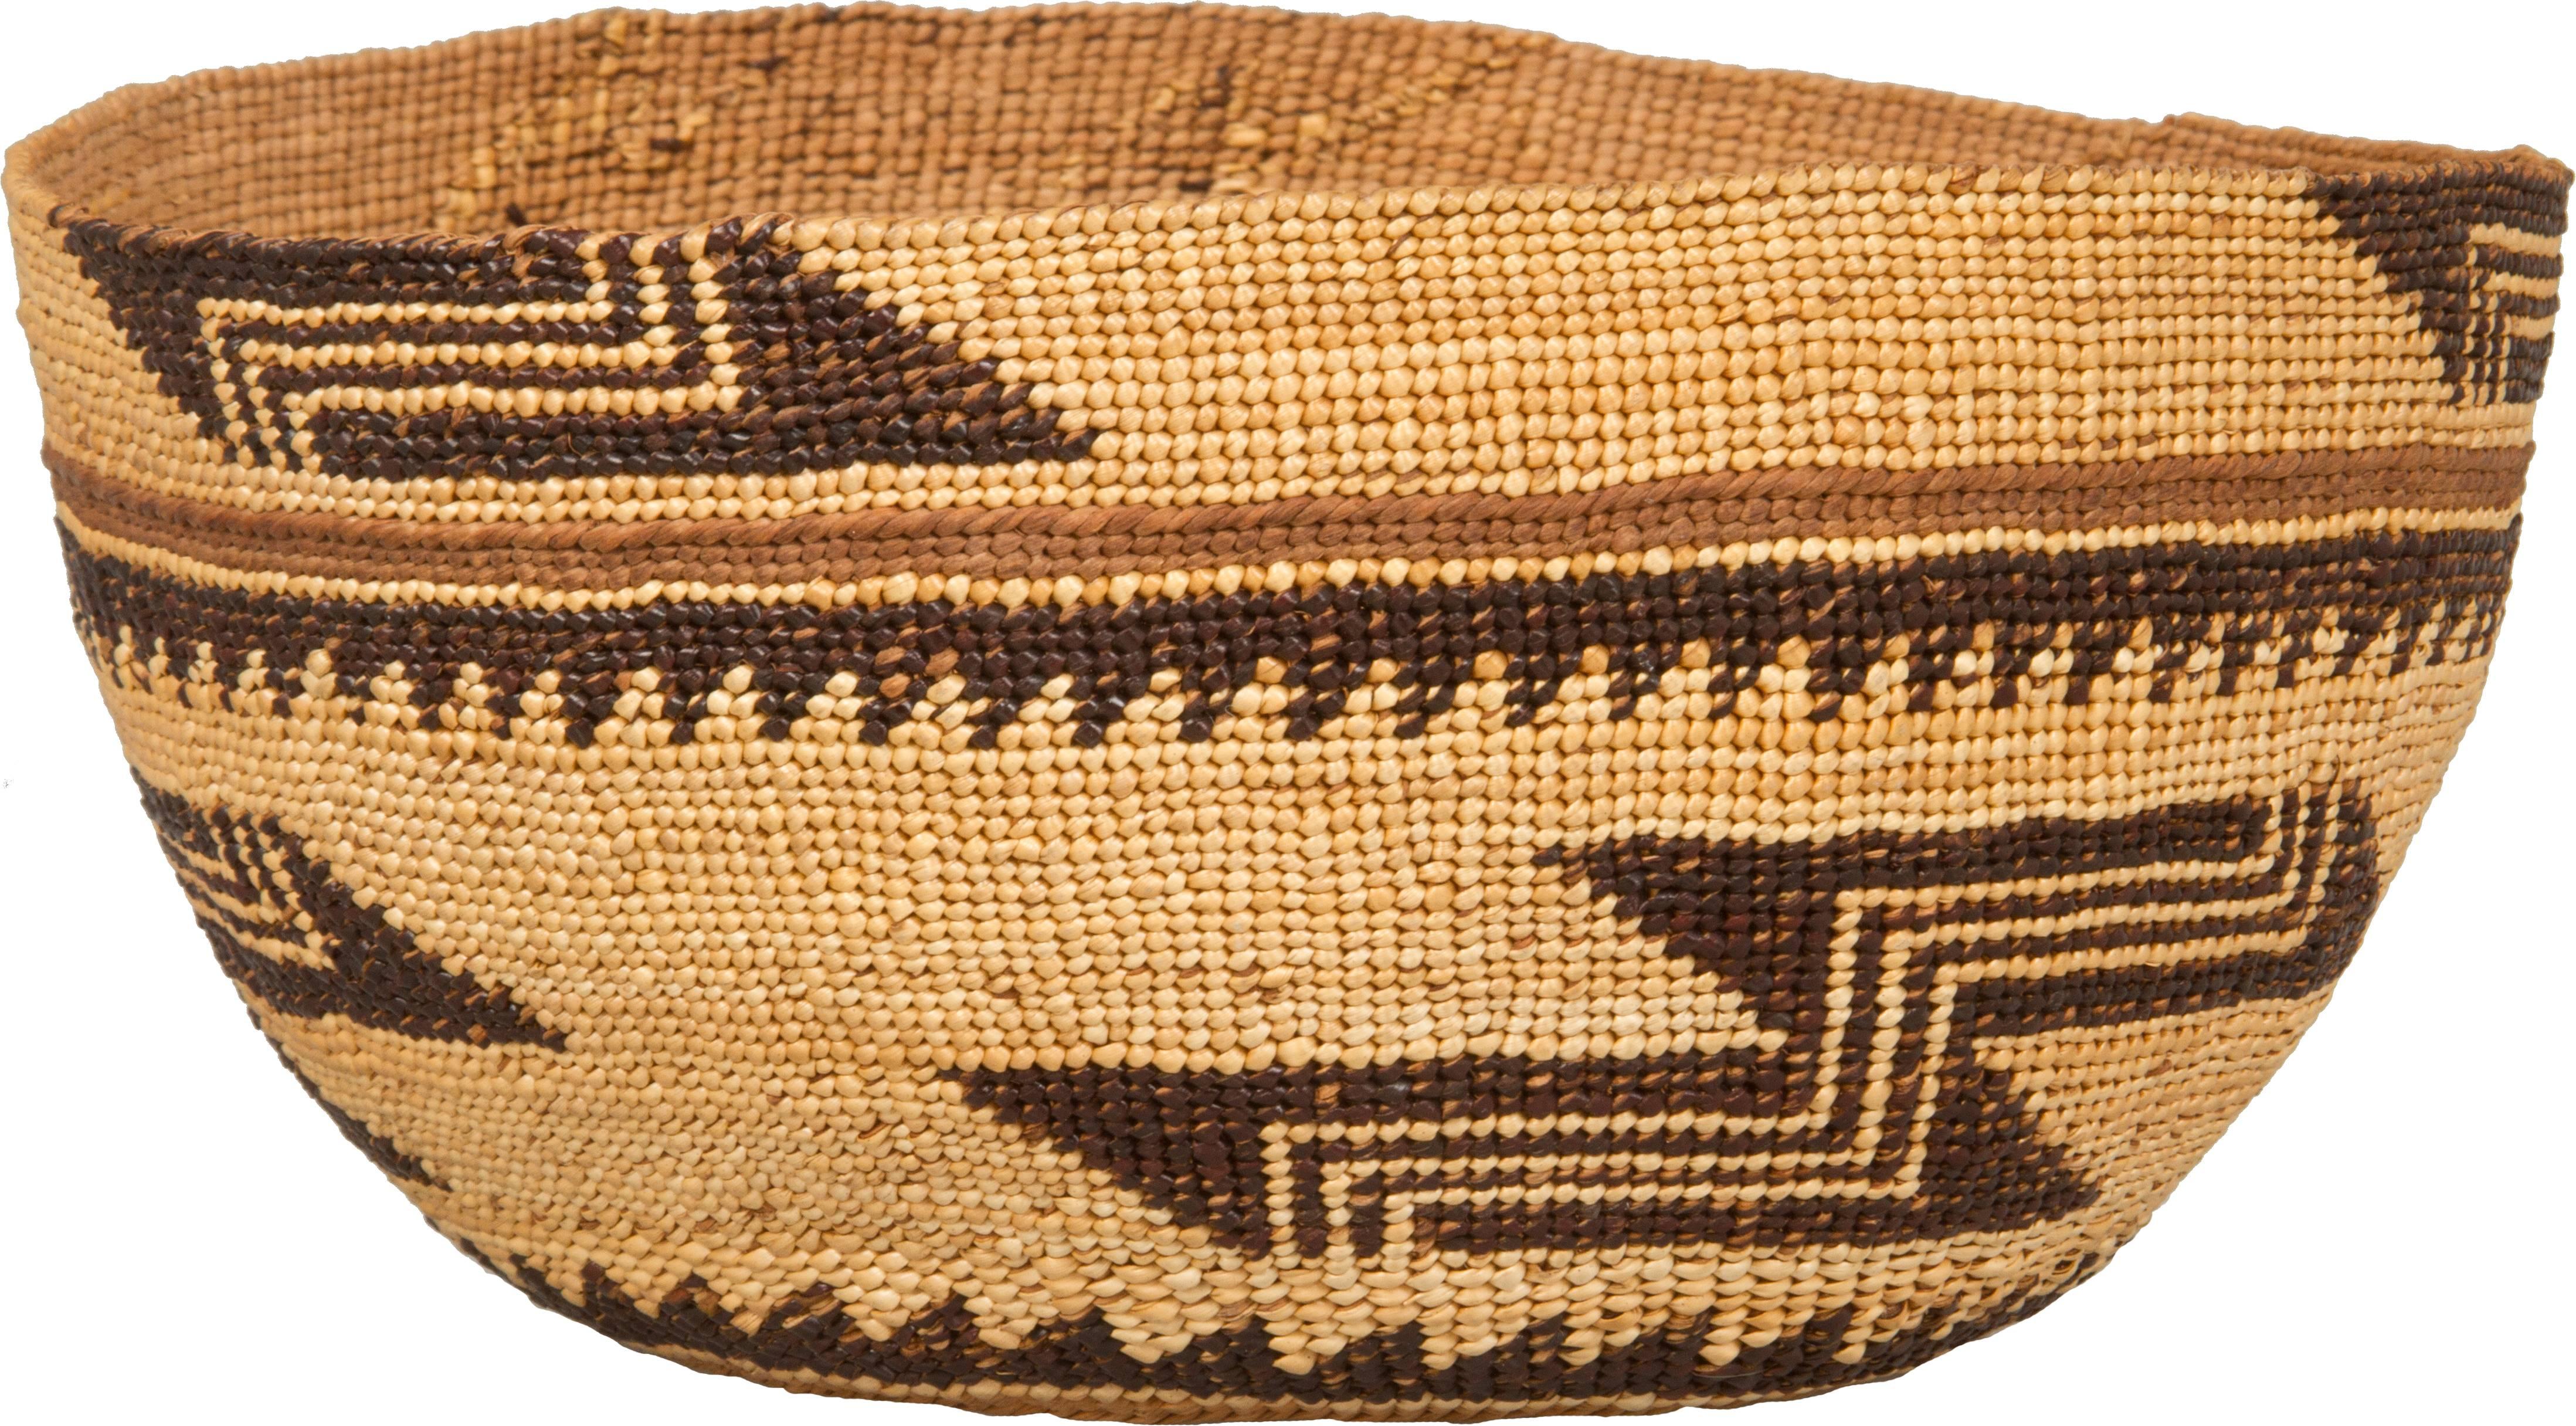 This is a wonderful and fine example of a California Native American Hupa basket. The colors are strong, graphic and the basket is very clean. There is a nice detail on the bottom.